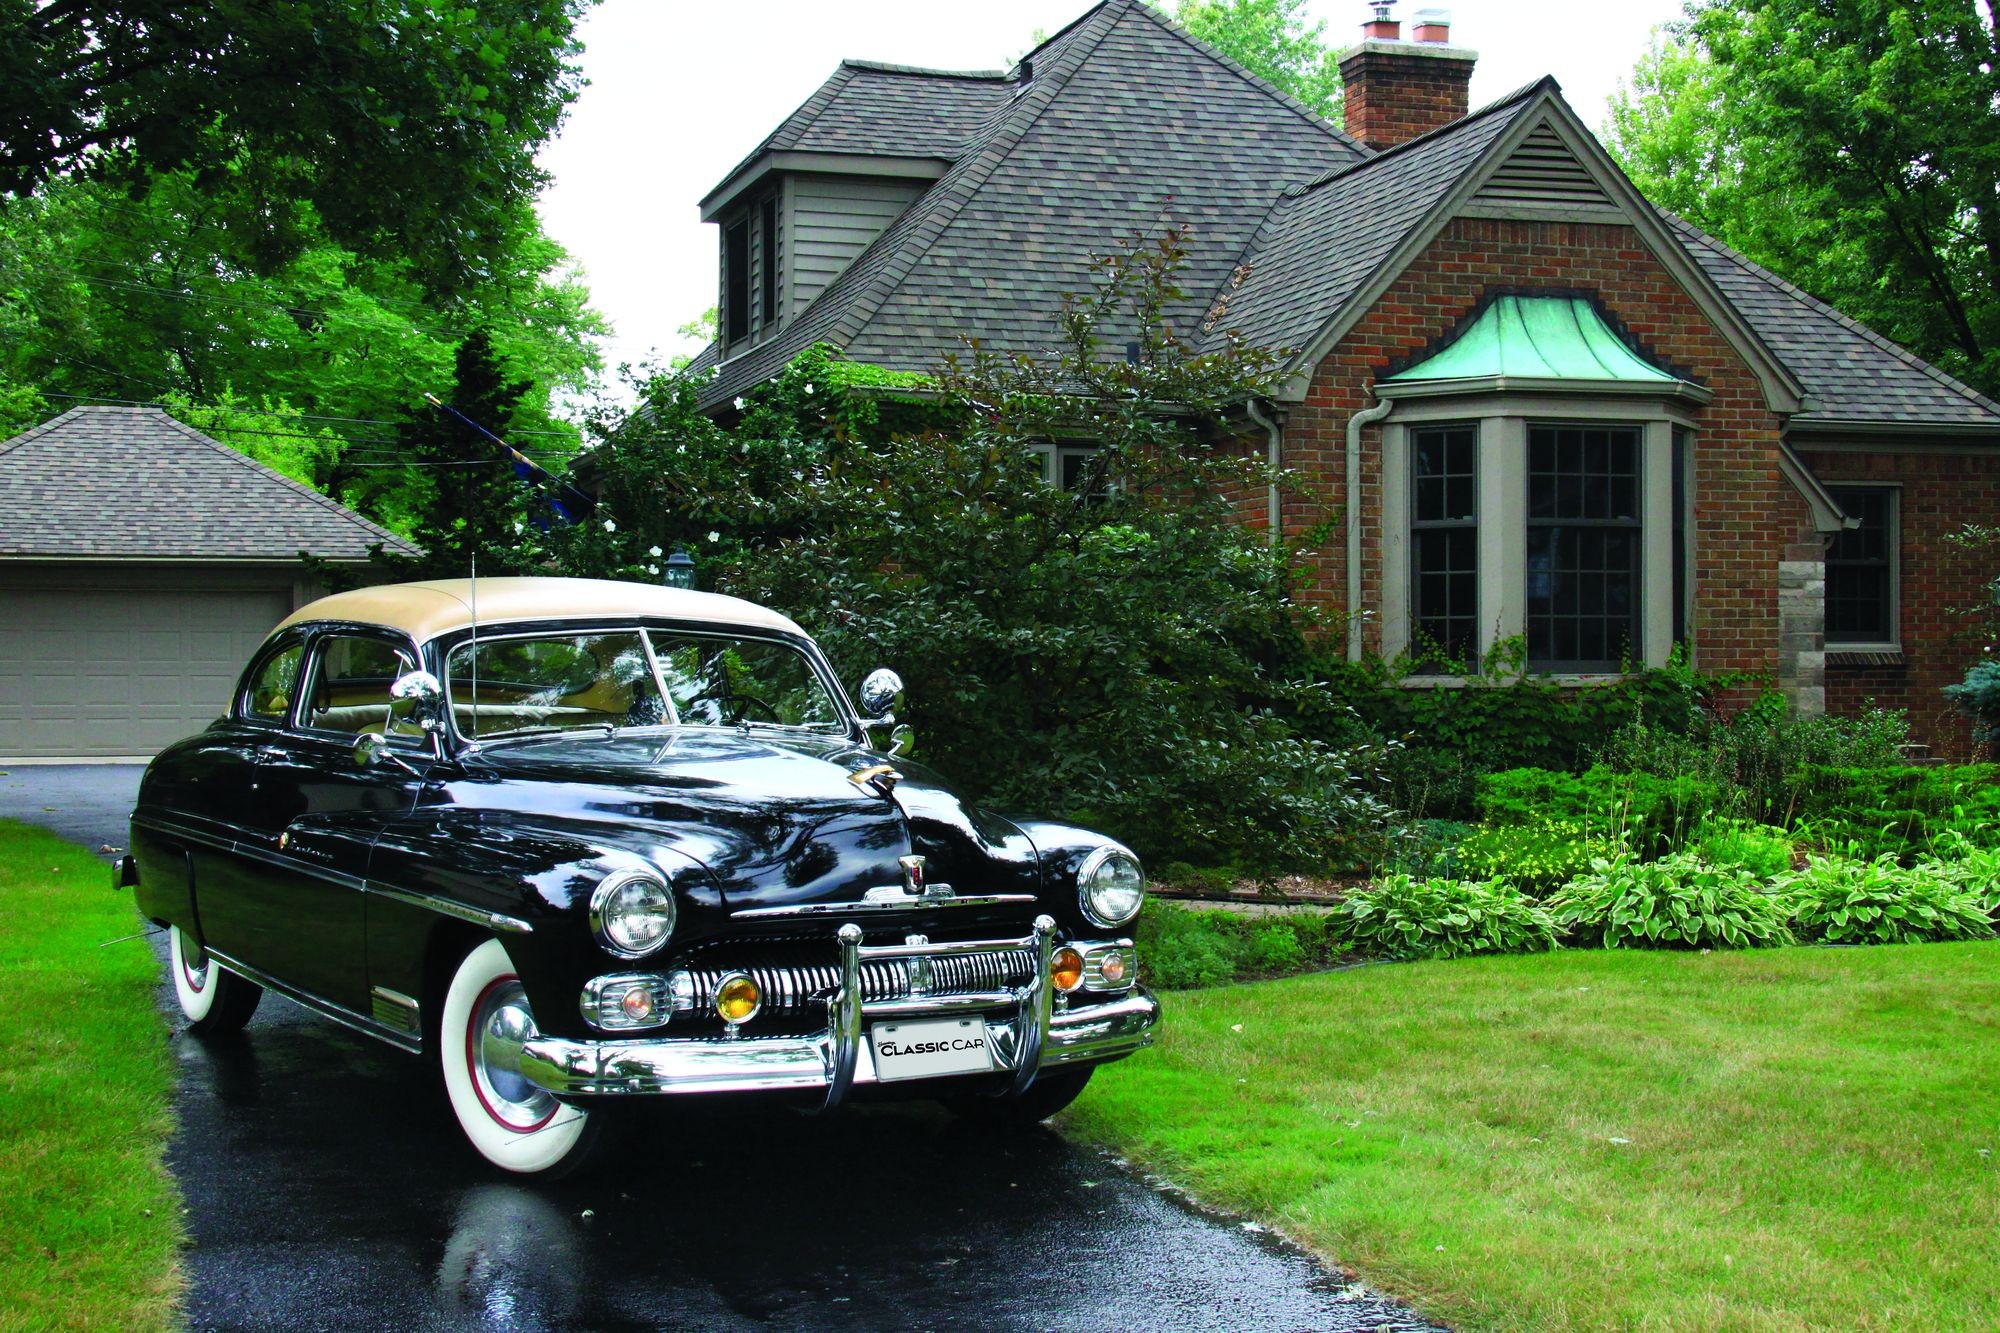 This 1950 Monterey Sport Coupe Remains an All-Original, One-Family Heirloom